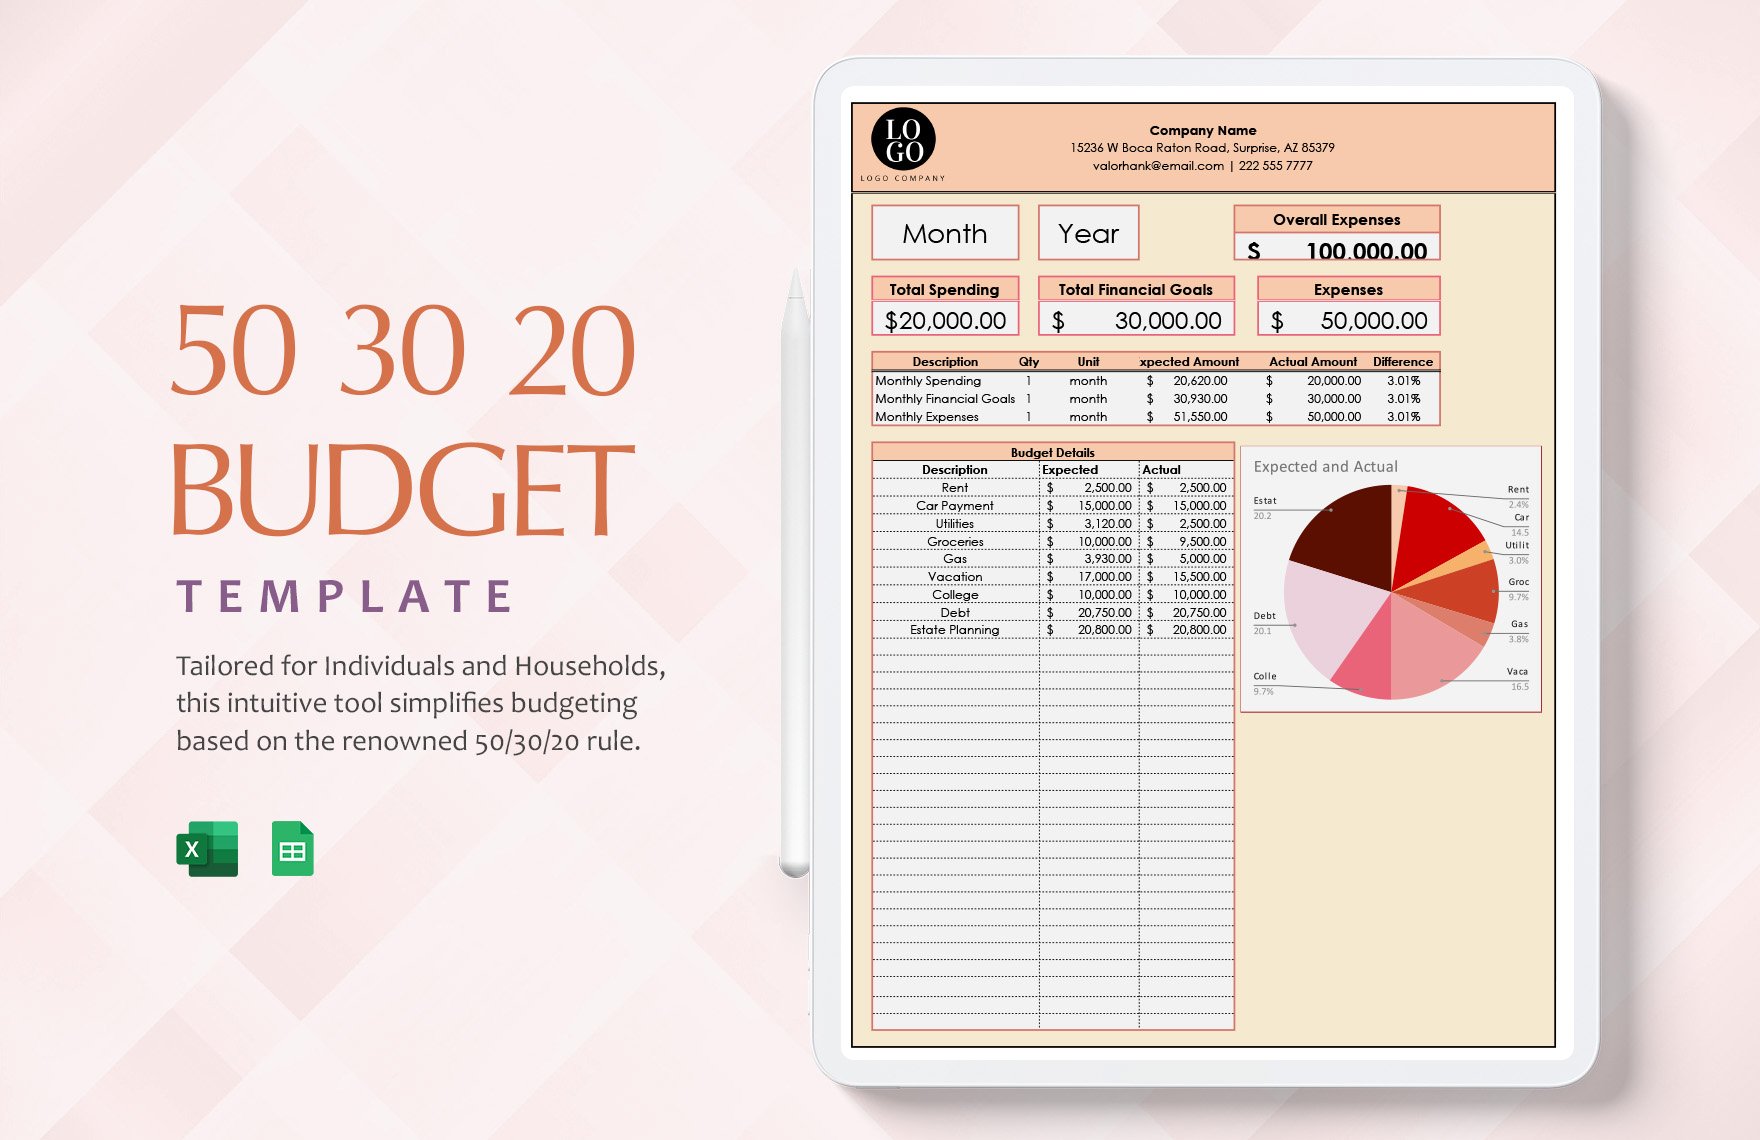 50 30 20 Budget Template in Excel, Google Sheets